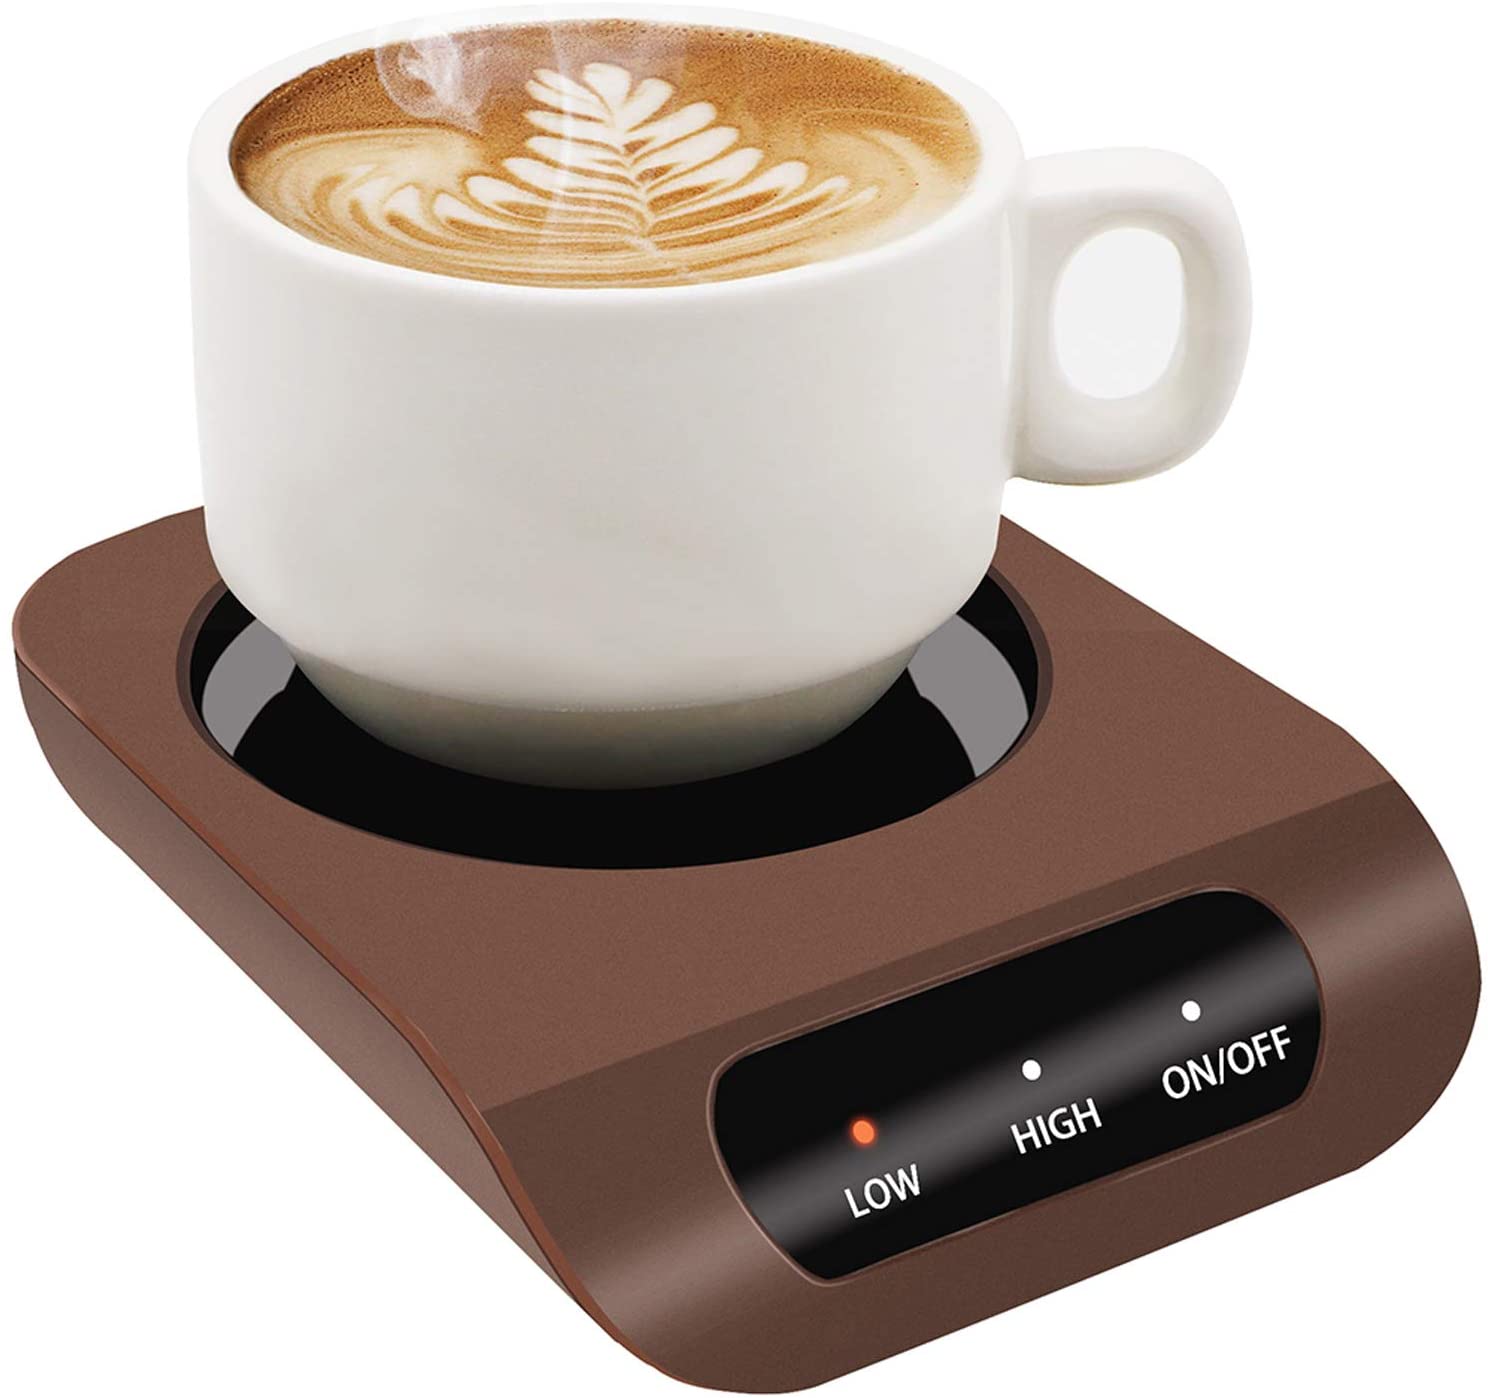 try a offee mug warming plate to warm your Fleshlight lube up